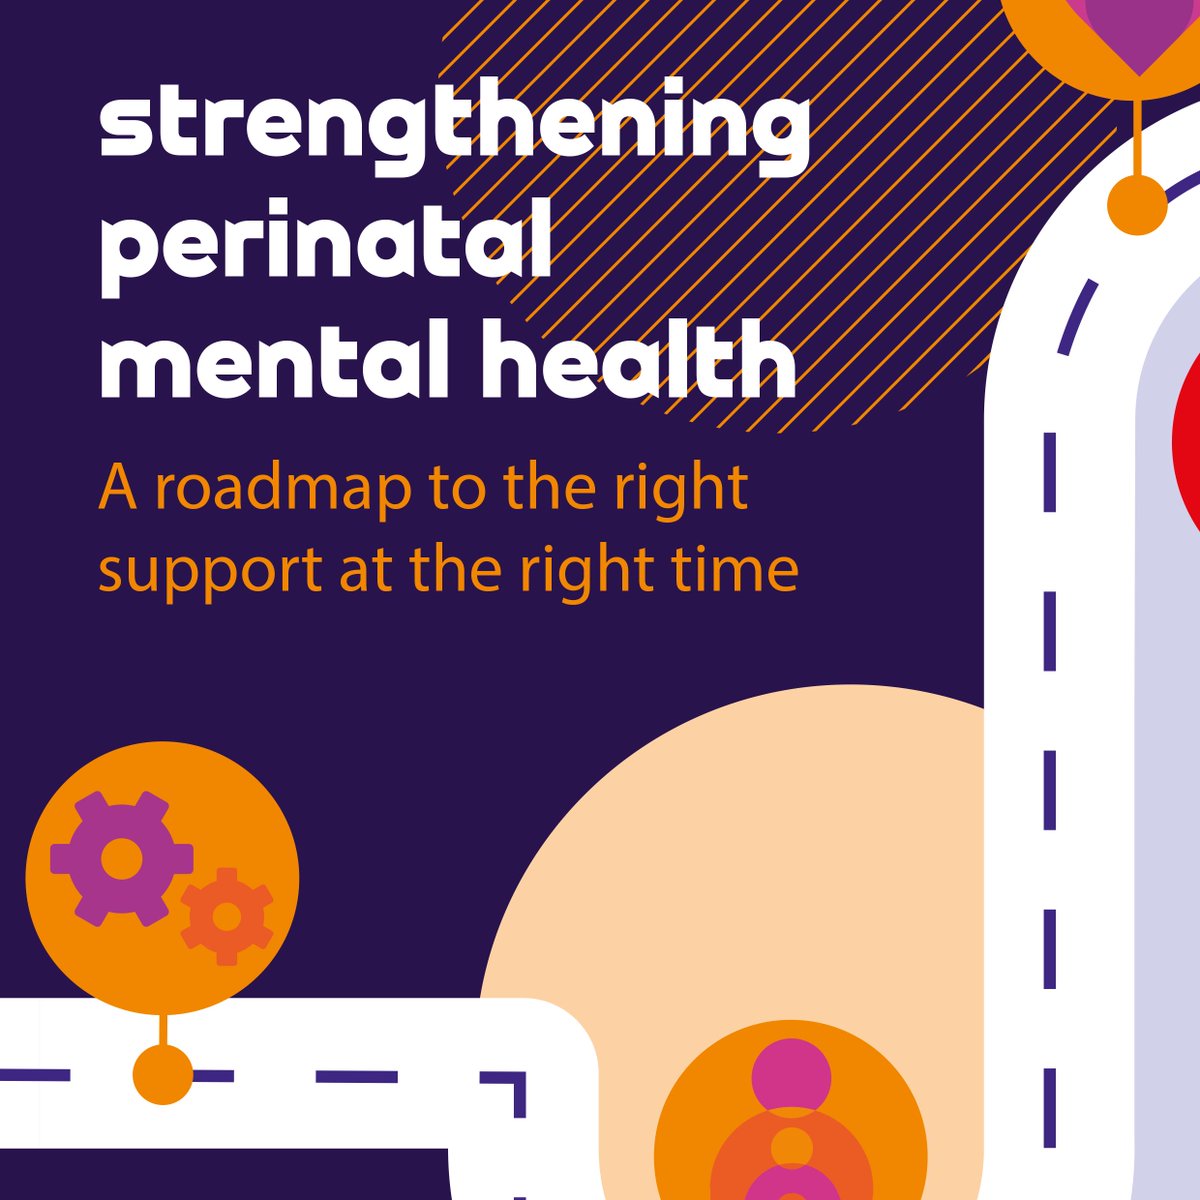 During pregnancy, and up to one year after birth, one in five women will experience mental health issues. This #MentalHealthAwarenessWeek our roadmap offers guidance for the delivery of better services for perinatal mental health buff.ly/49XUo00